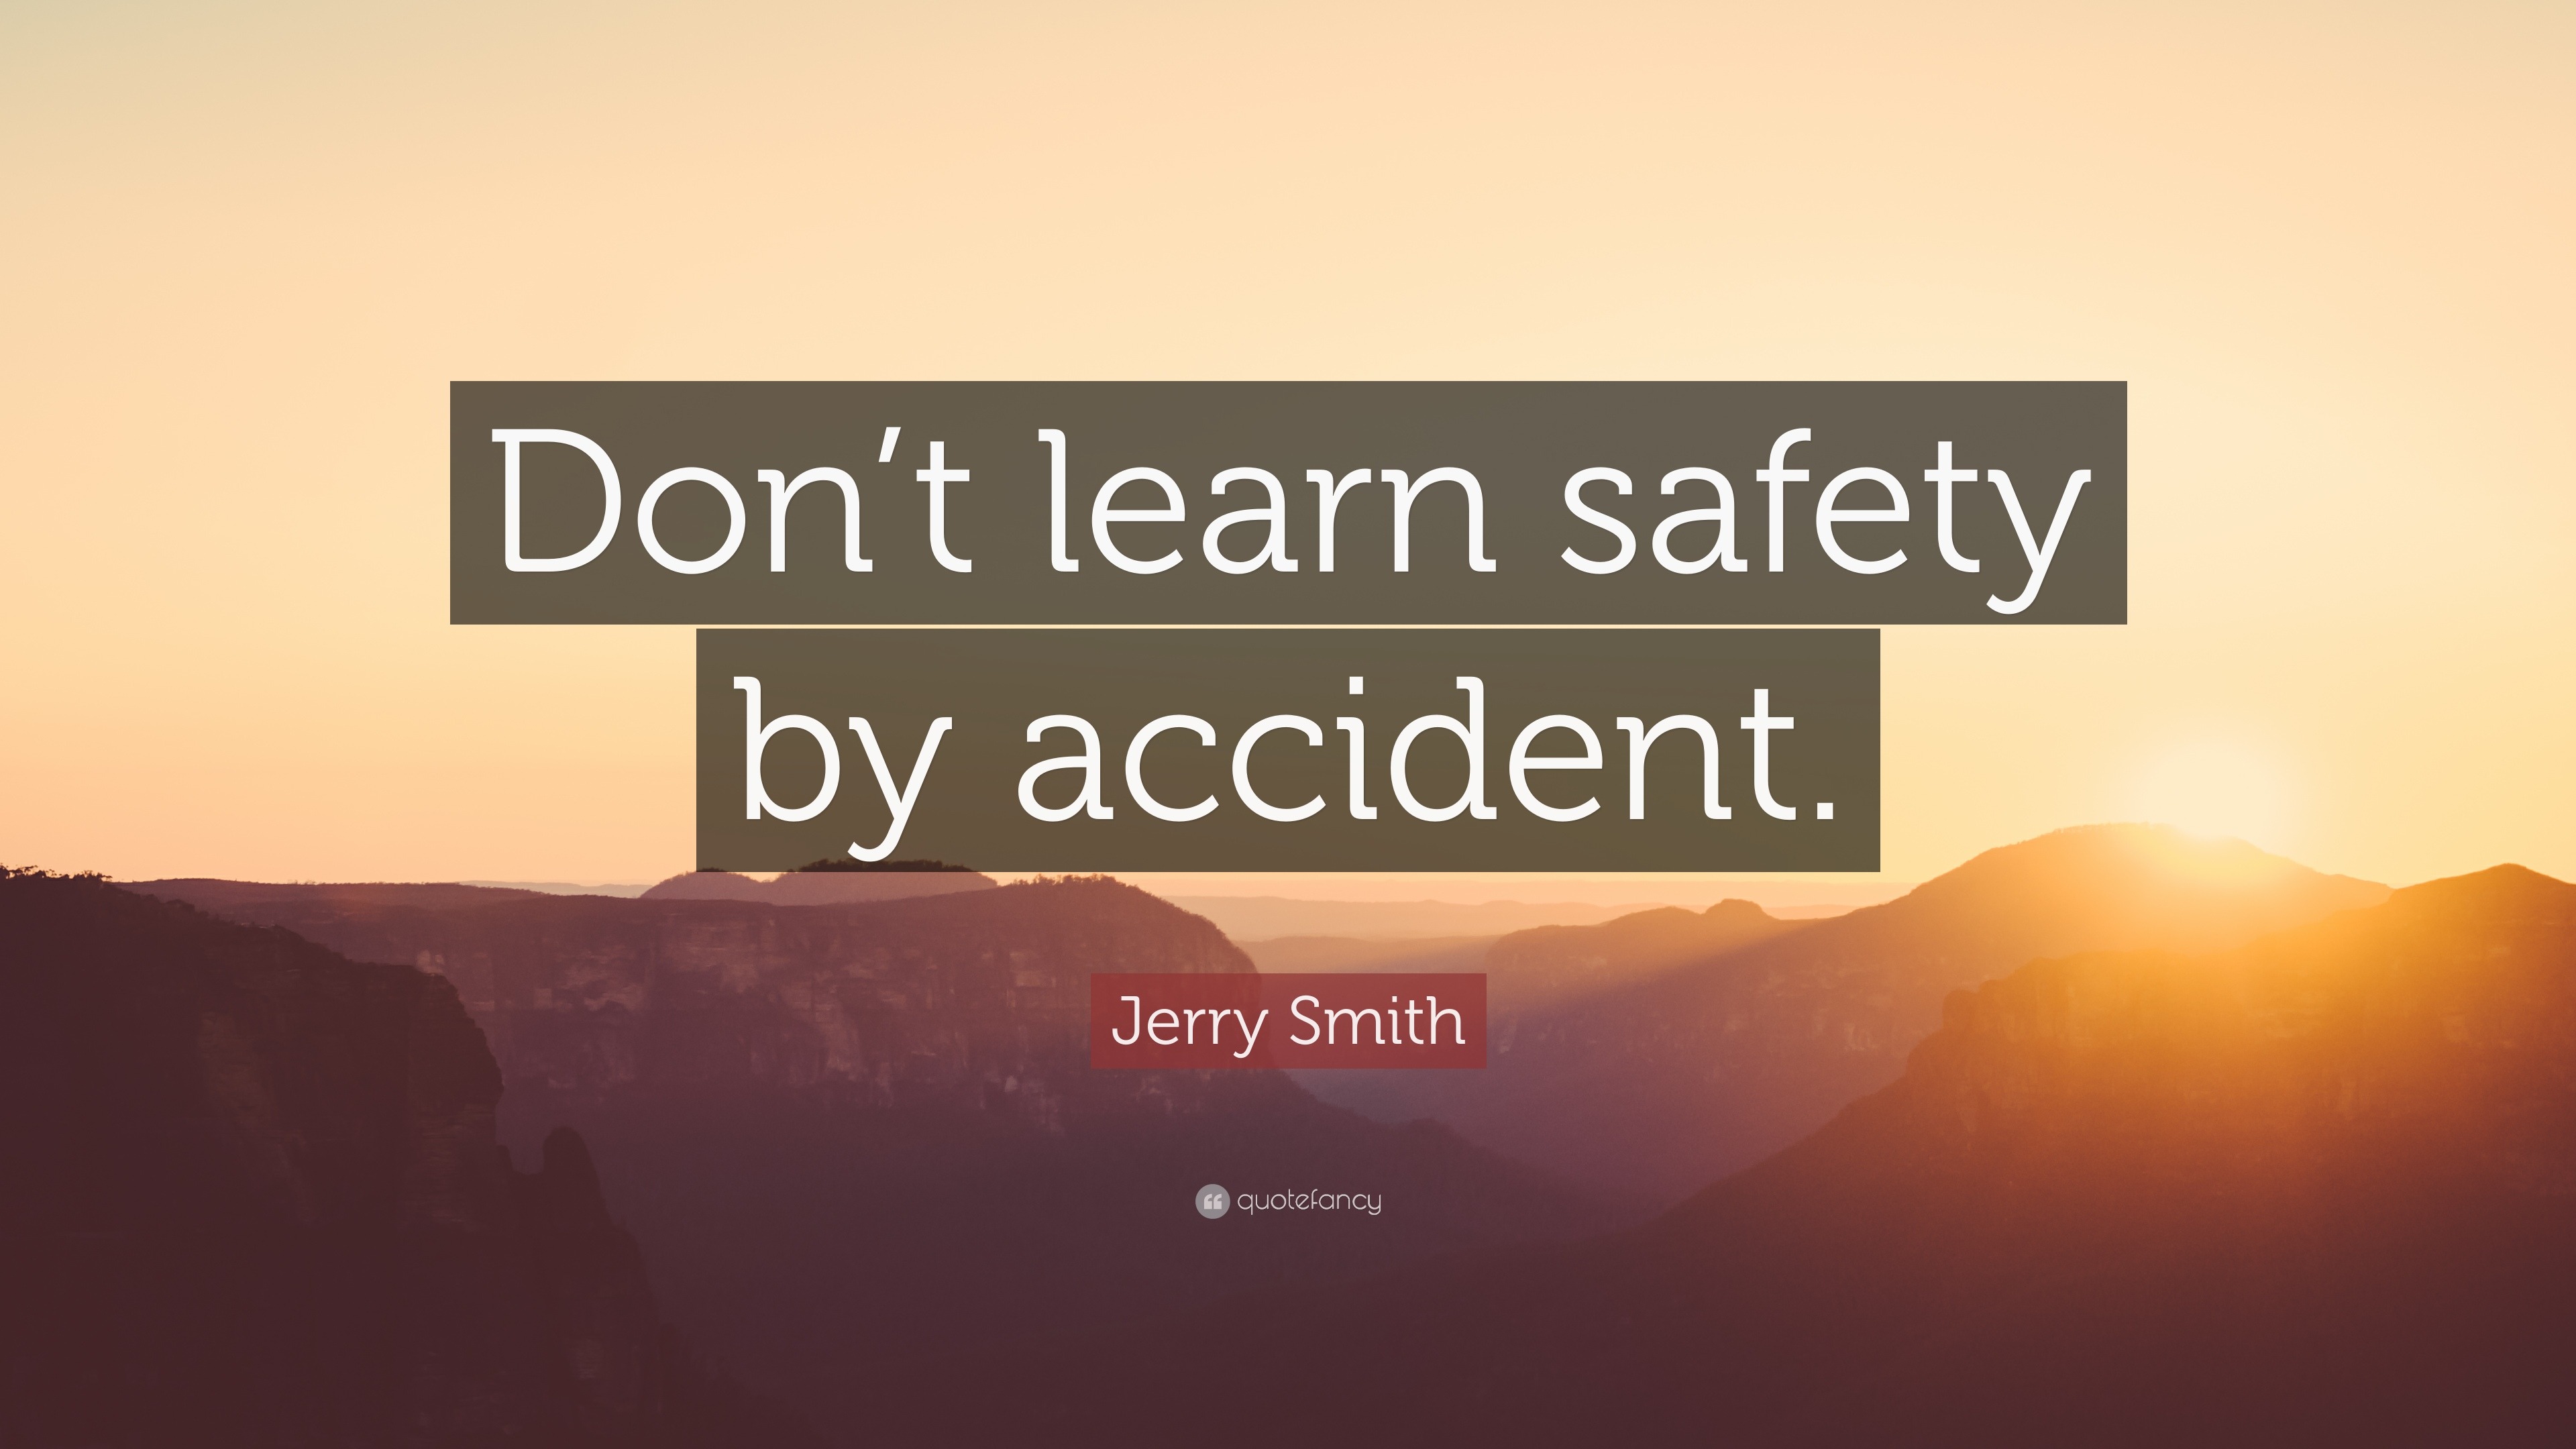 Jerry Smith Quote: “Don’t learn safety by accident.”